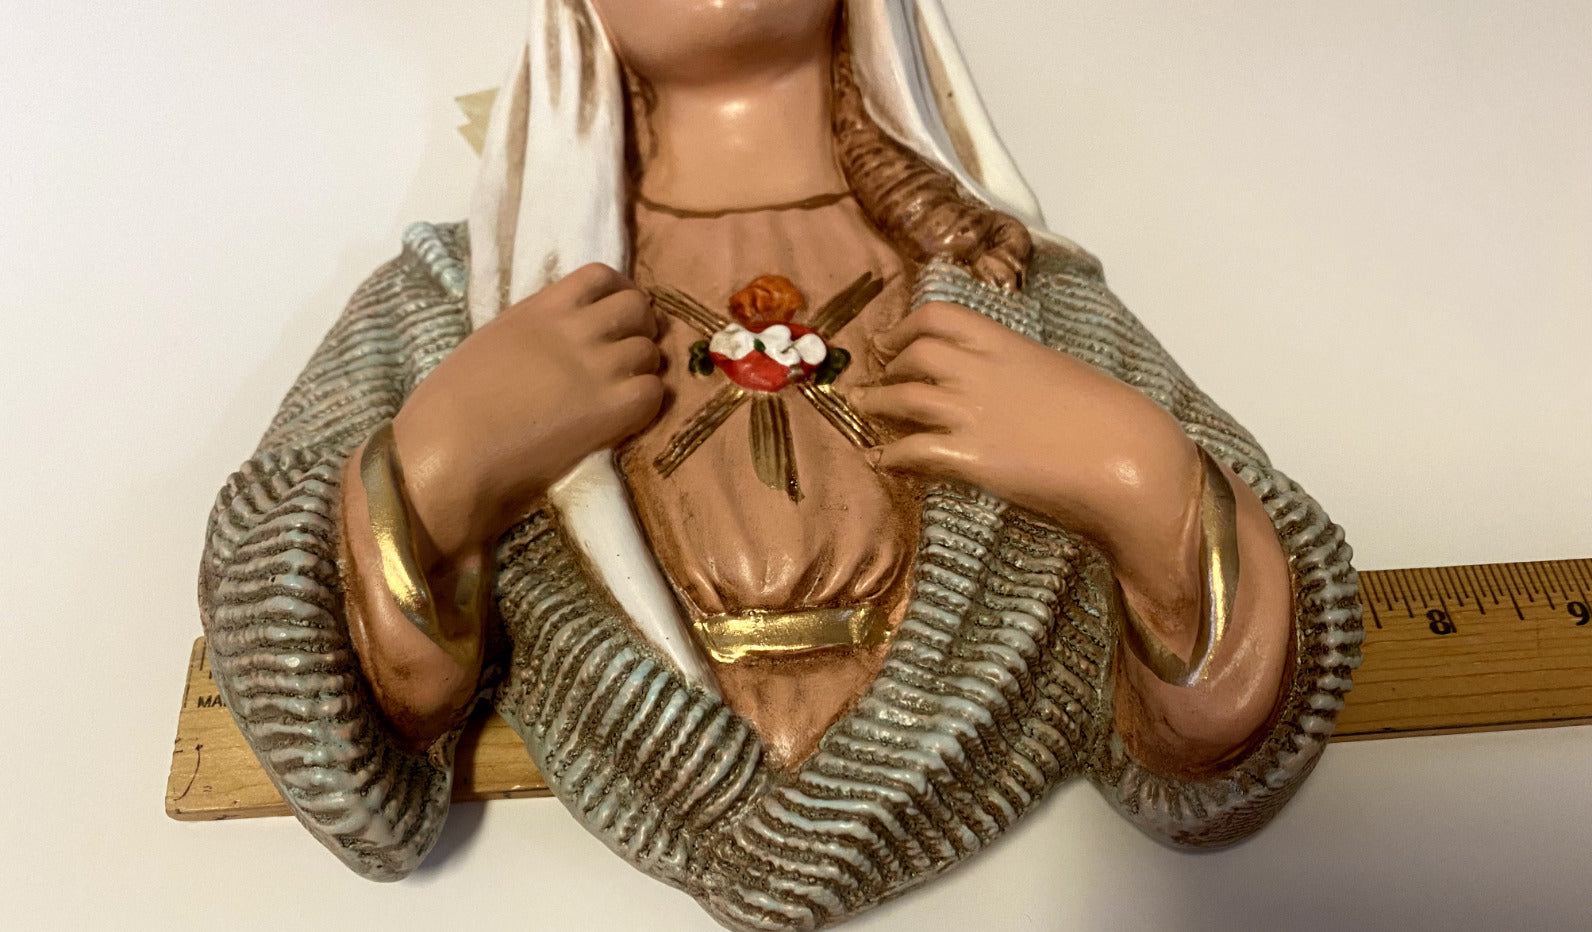 Immaculate Heart of Mary 9" Hand Painted Wall Plaque, New from Colombia - Bob and Penny Lord